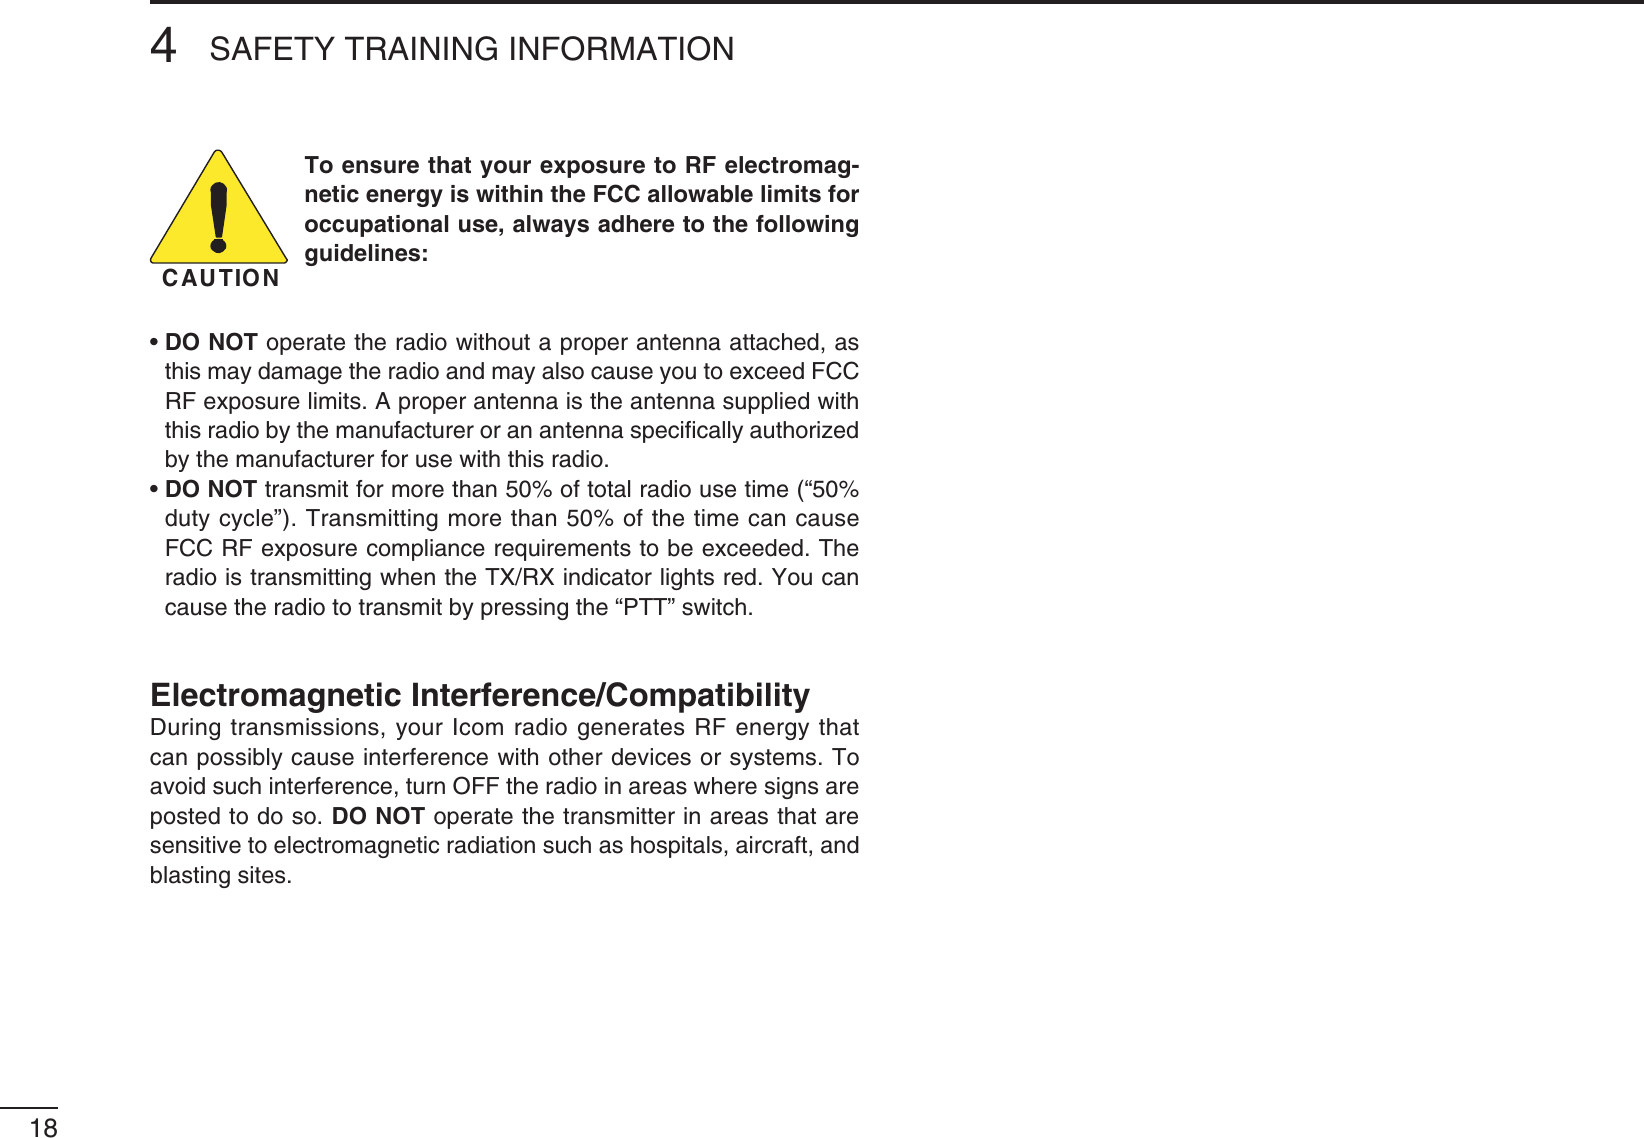 184SAFETY TRAINING INFORMATIONCAUTIONTo ensure that your exposure to RF electromag-netic energy is within the FCC allowable limits for occupational use, always adhere to the following GUIDELINESsDO NOT operate the radio without a proper antenna attached, as THISMAYDAMAGETHERADIOANDMAYALSOCAUSEYOUTOEXCEED&amp;##2&amp;EXPOSURELIMITS!PROPERANTENNAISTHEANTENNASUPPLIEDWITHthis radio by the manufacturer or an antenna speciﬁcally authorized by the manufacturer for use with this radio.sDO NOT transmit for more than 50% of total radio use time (“50% duty cycle”). Transmitting more than 50% of the time can cause &amp;##2&amp;EXPOSURECOMPLIANCEREQUIREMENTSTOBEEXCEEDED4HERADIOISTRANSMITTINGWHENTHE4828INDICATORLIGHTSRED9OUCANcause the radio to transmit by pressing the “PTT” switch.Electromagnetic Interference/CompatibilityDuring transmissions, your Icom radio generates RF energy that can possibly cause interference with other devices or systems. To avoid such interference, turn OFF the radio in areas where signs are posted to do so. DO NOT operate the transmitter in areas that are sensitive to electromagnetic radiation such as hospitals, aircraft, and blasting sites.